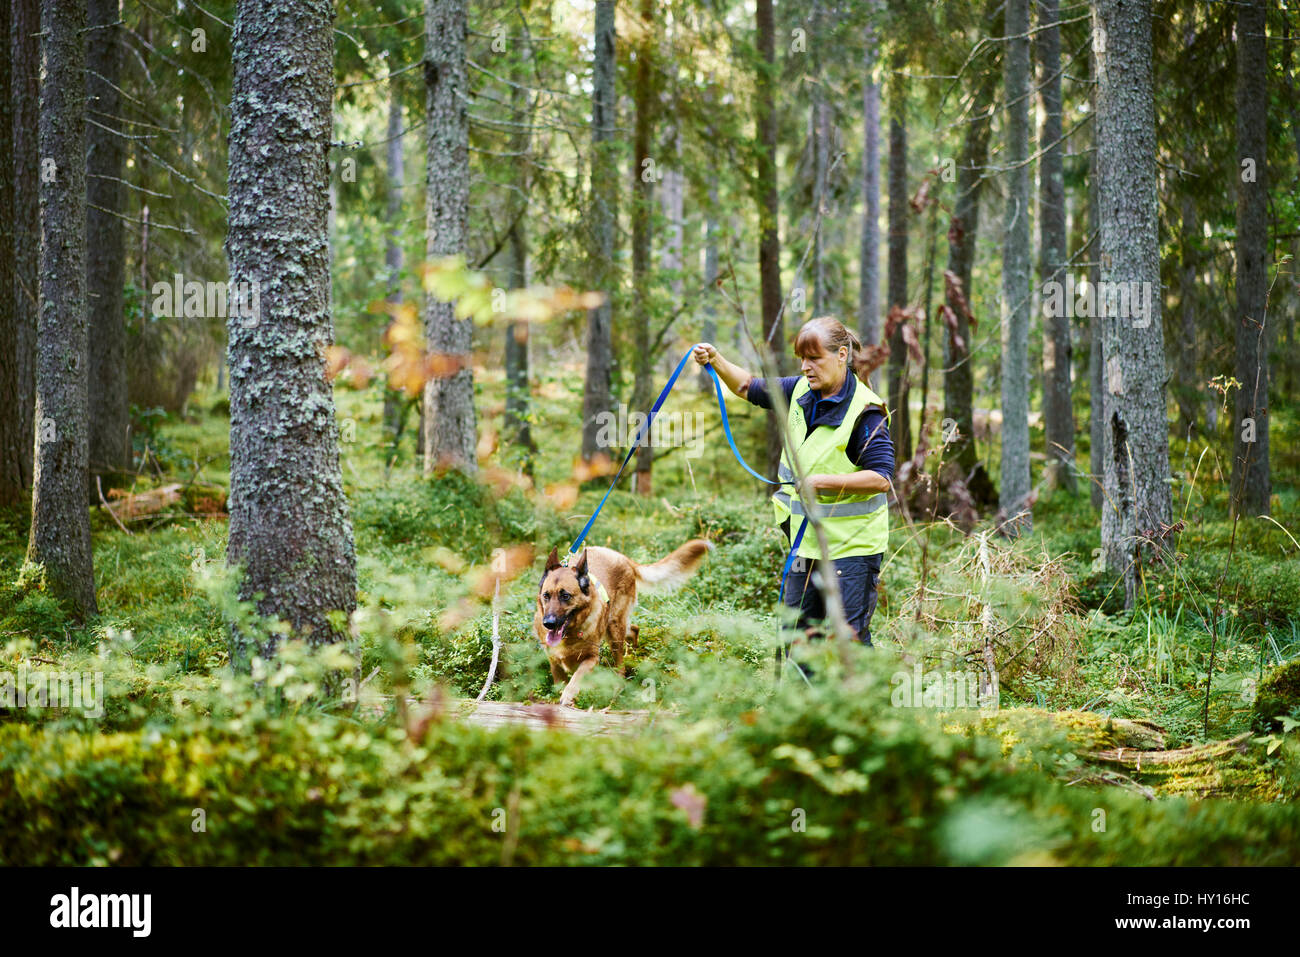 Sweden, Uppland, Rison, Volunteer with dog helping emergency services find missing people Stock Photo